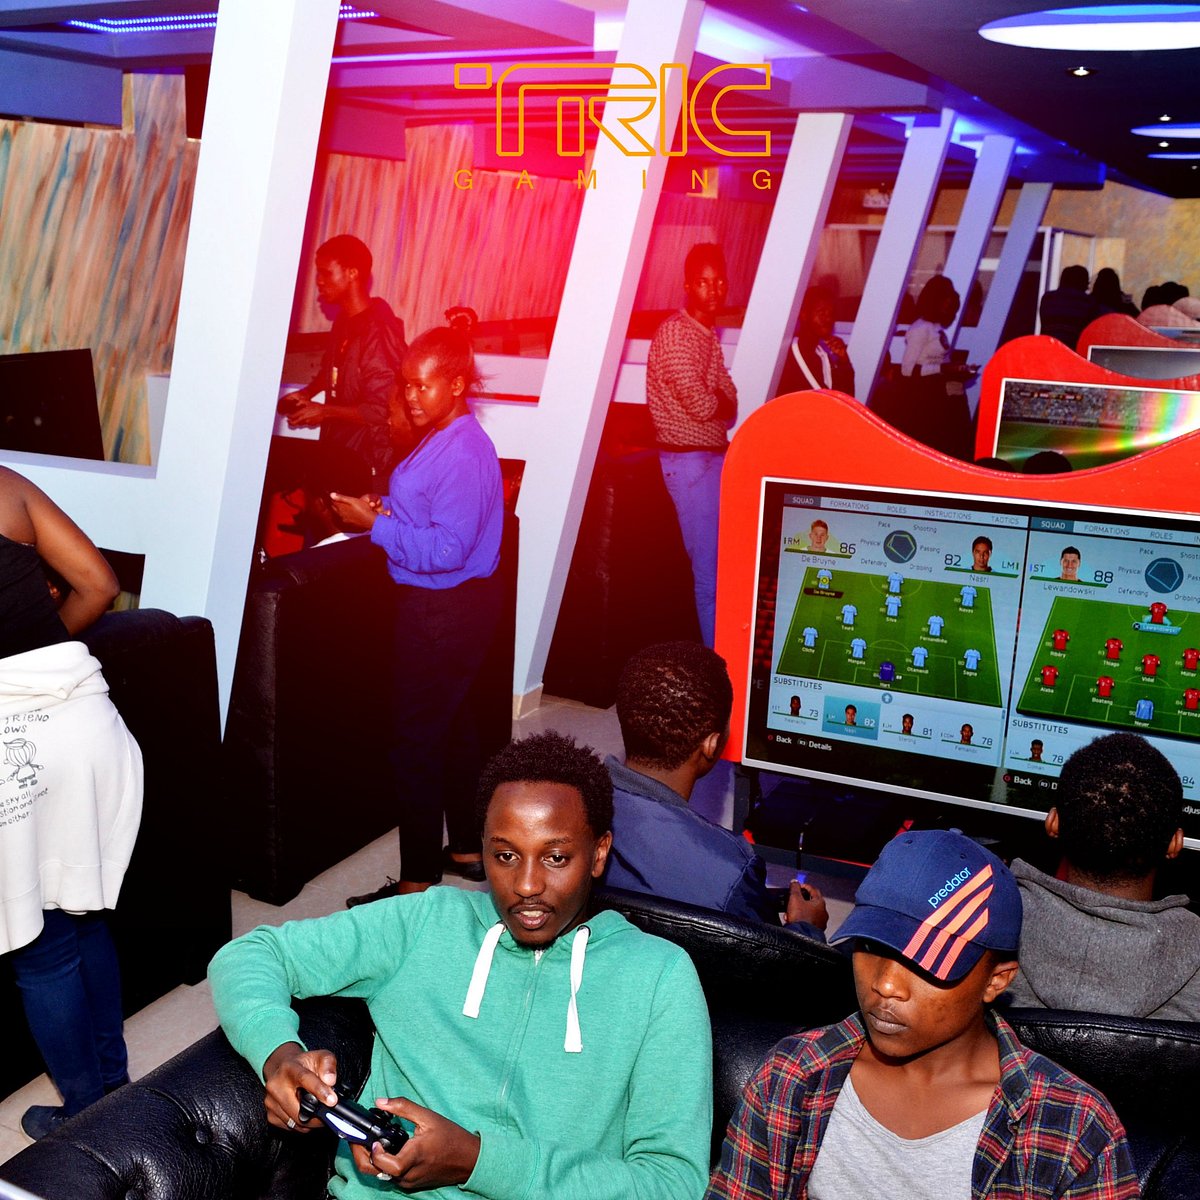 FIFA 24 Standard Edition Ps4 in Nairobi Central - Video Games